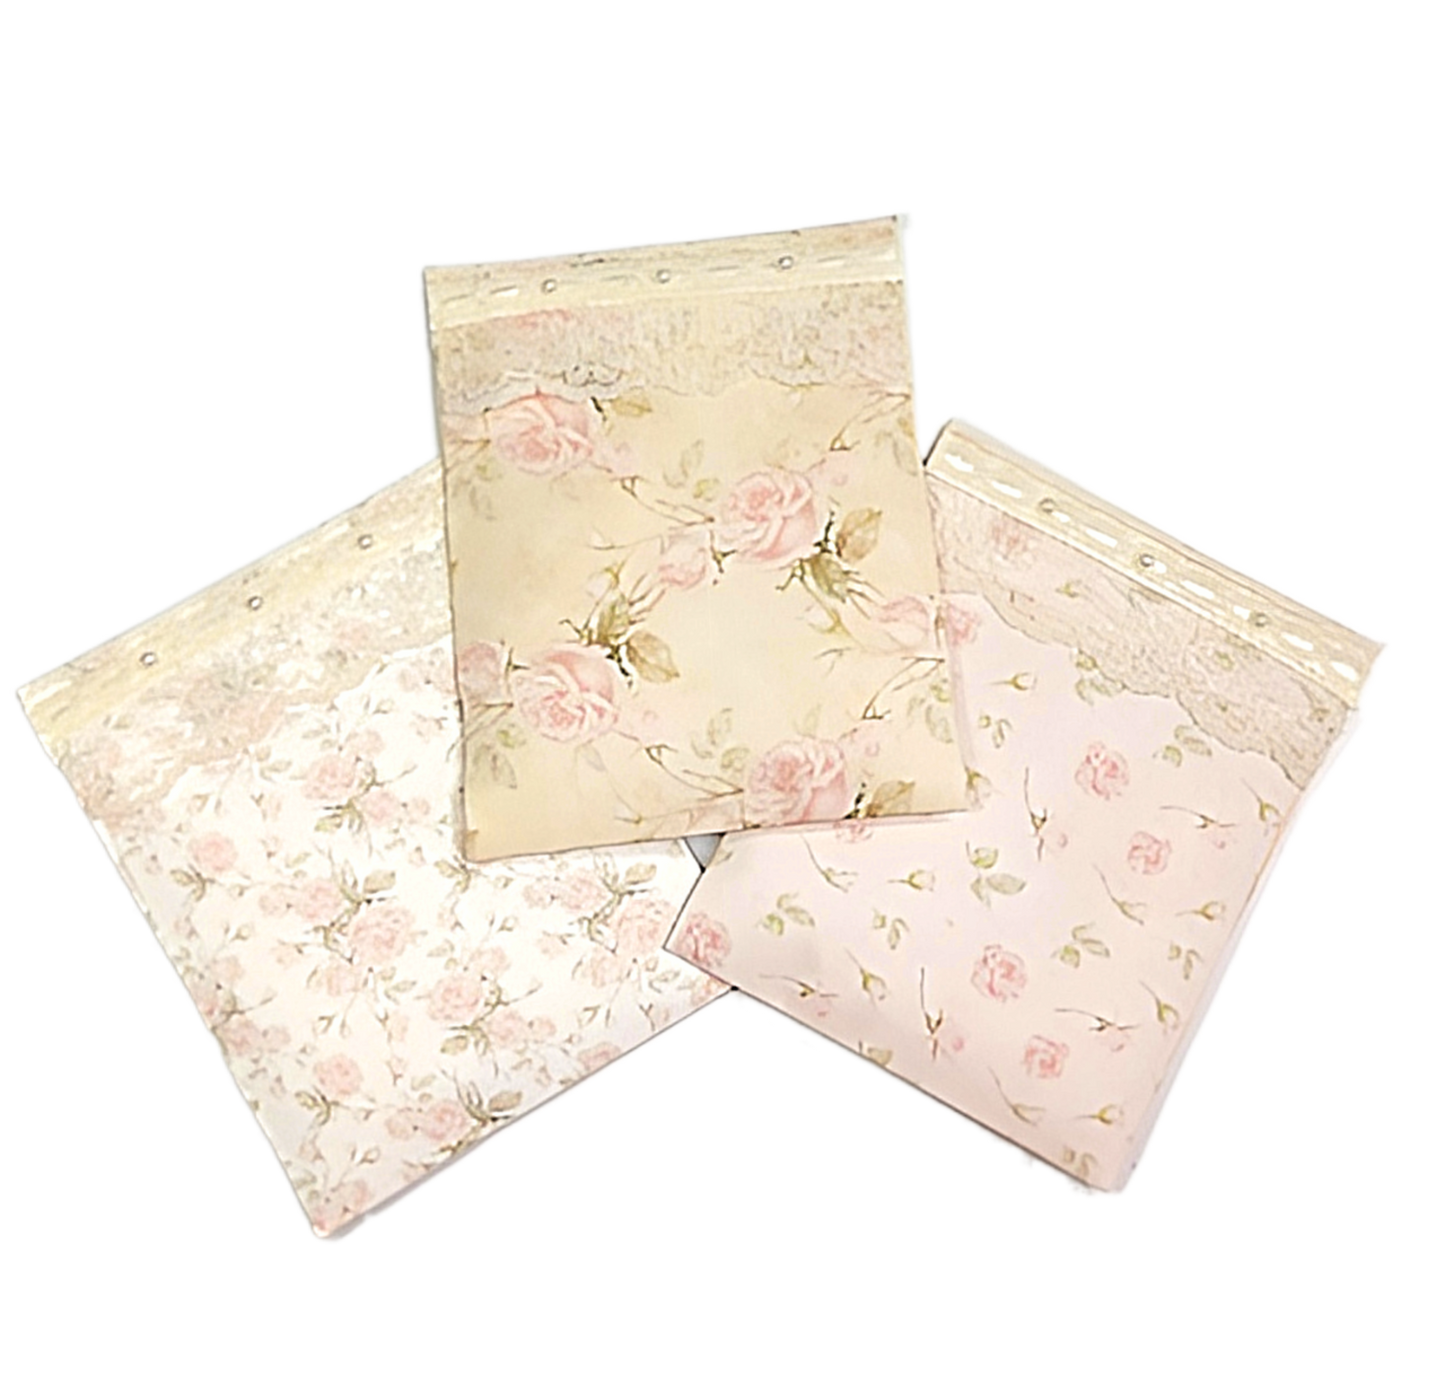 Pearls & Lace Rose Fragrance Scented Drawer & Closet Sachets, Large Size 4" x 5", 3-Pack - Chic Brico